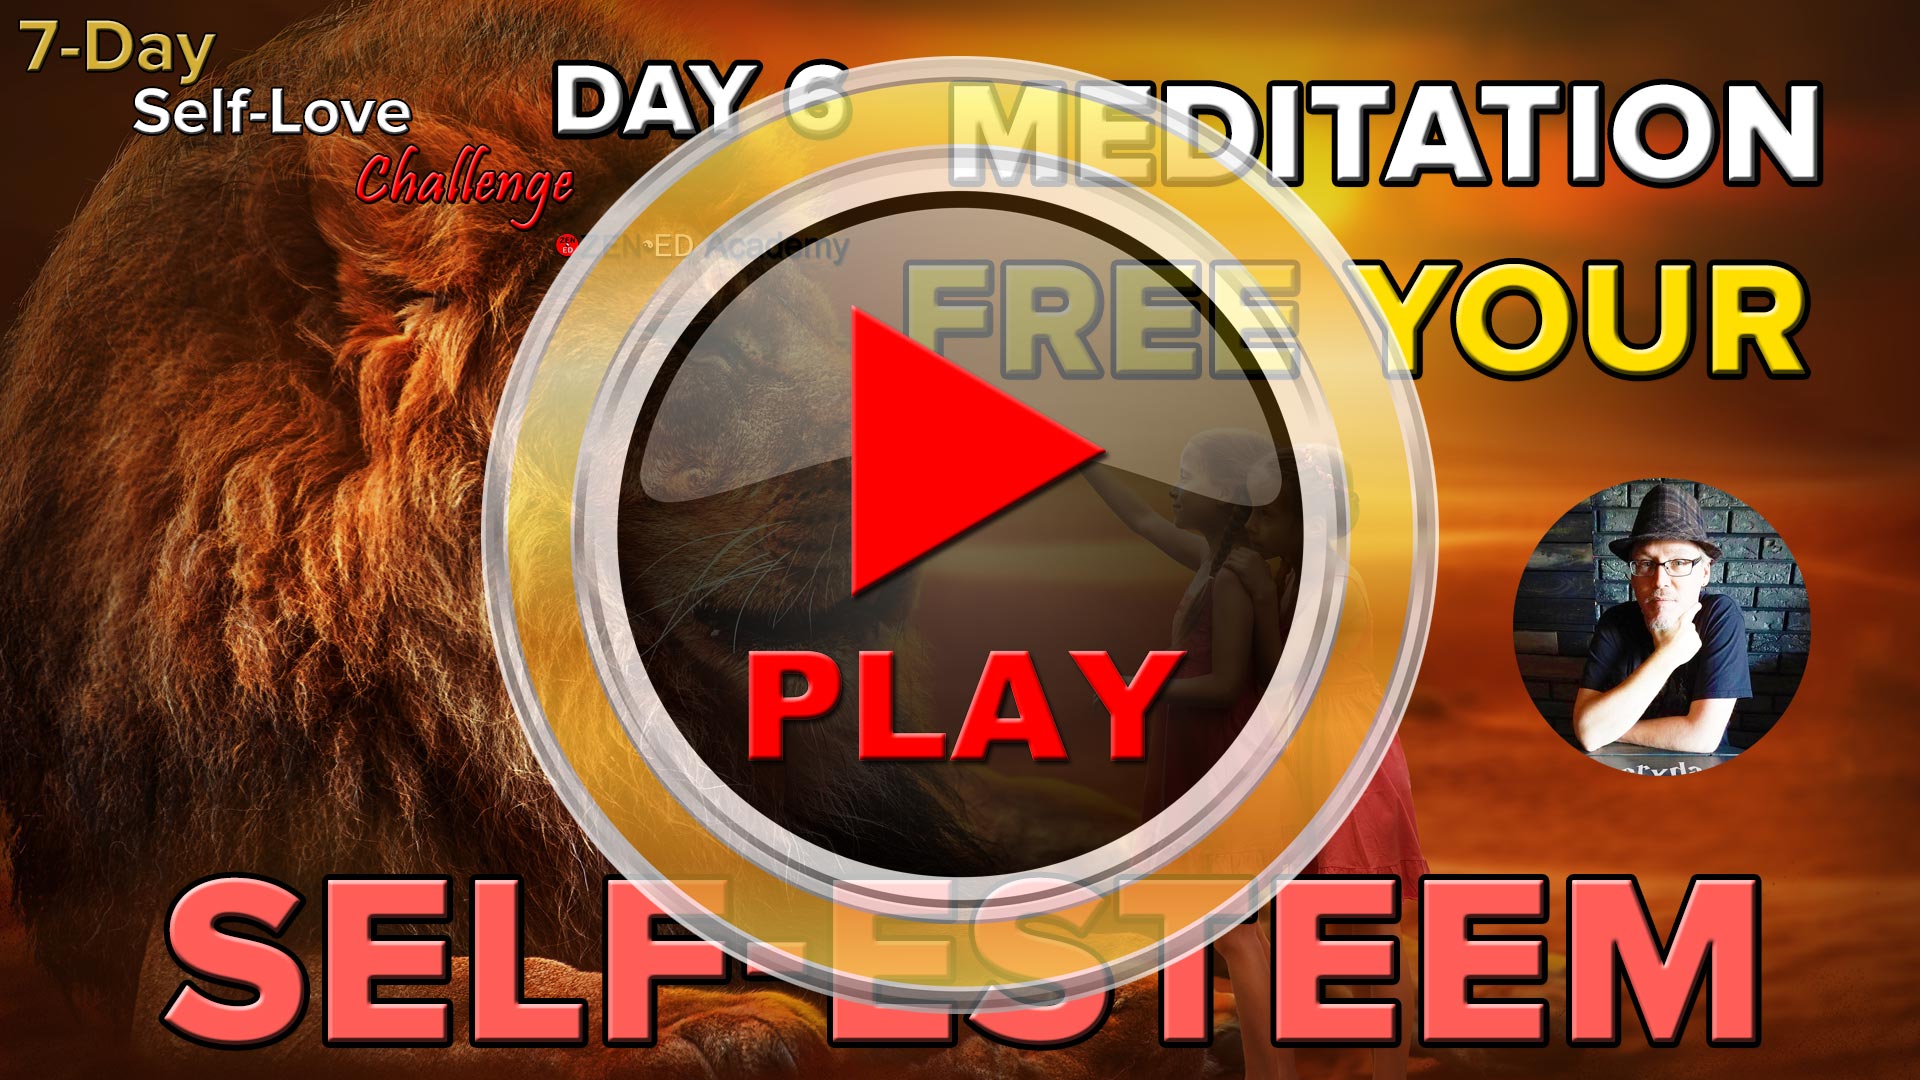 Play Meditation Day 6: Free Your Self-Esteem (Thumbnail) Zen Ed Academy's Free 7-Day Self-Love Challenge